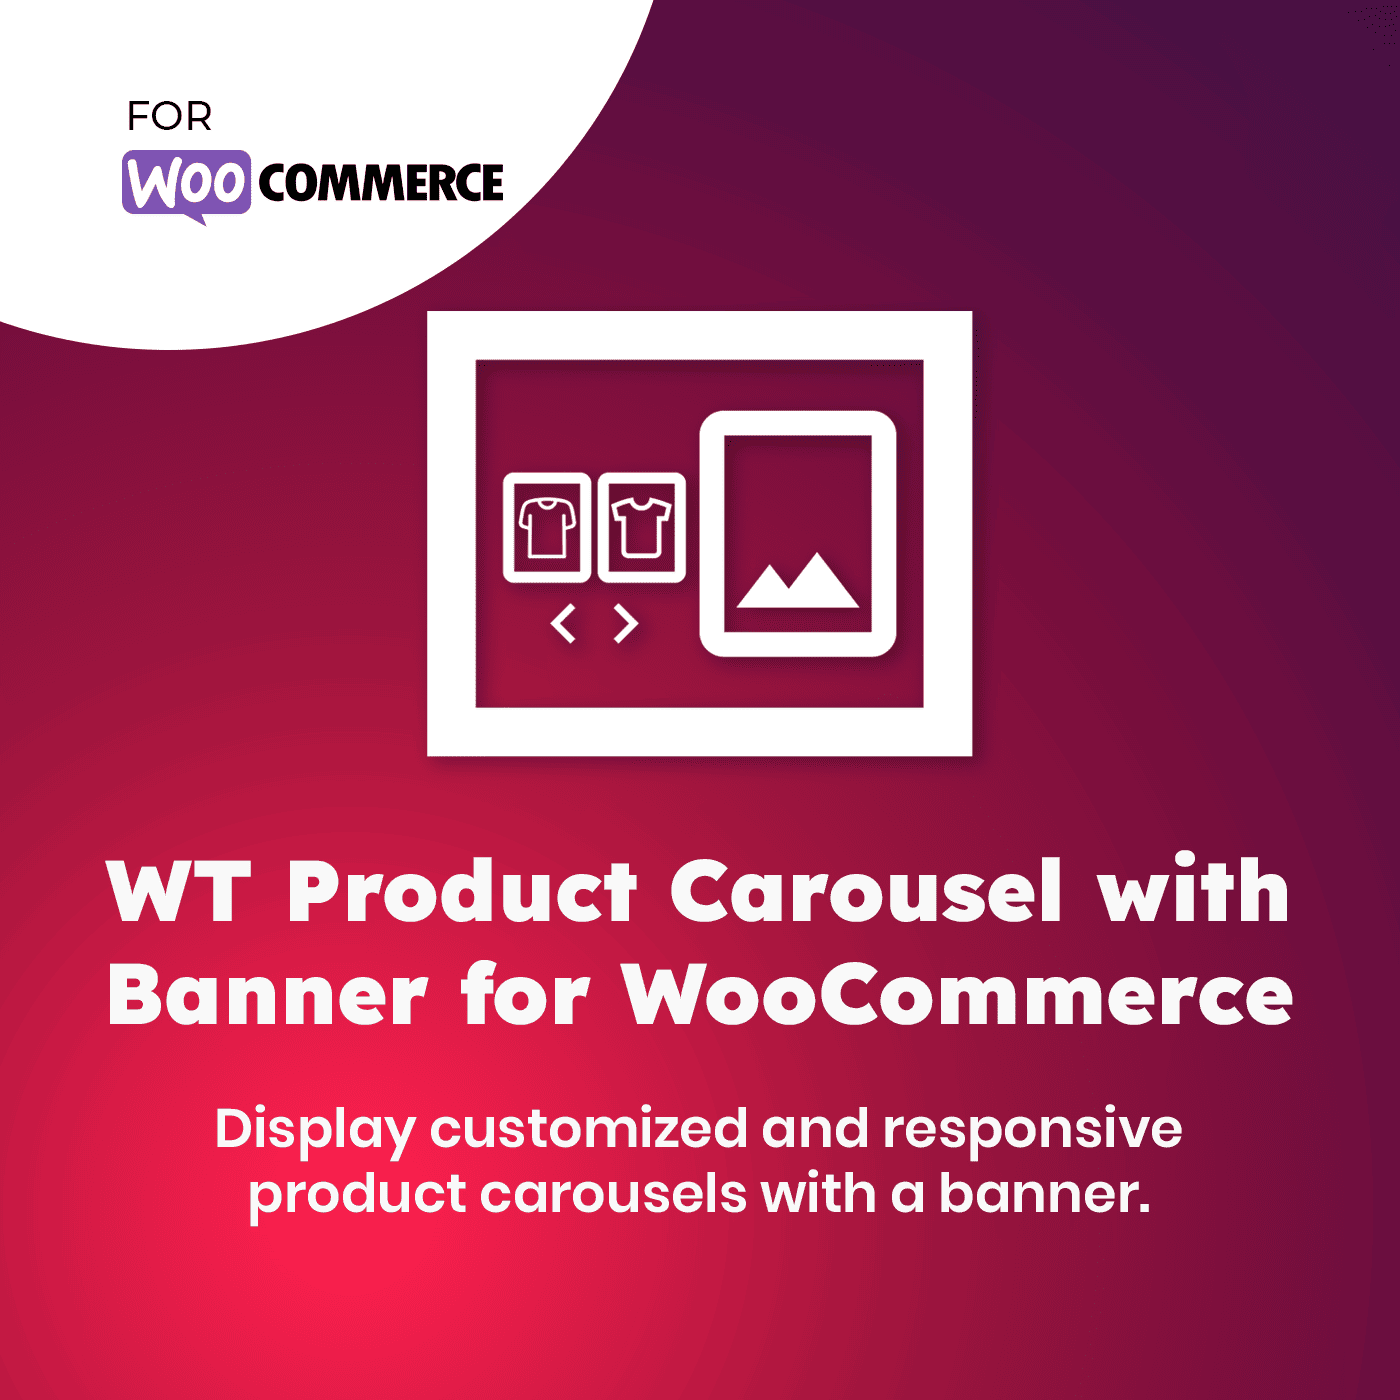 WT Product Carousel with Banner for WooCommerce - WooCommerce Theme